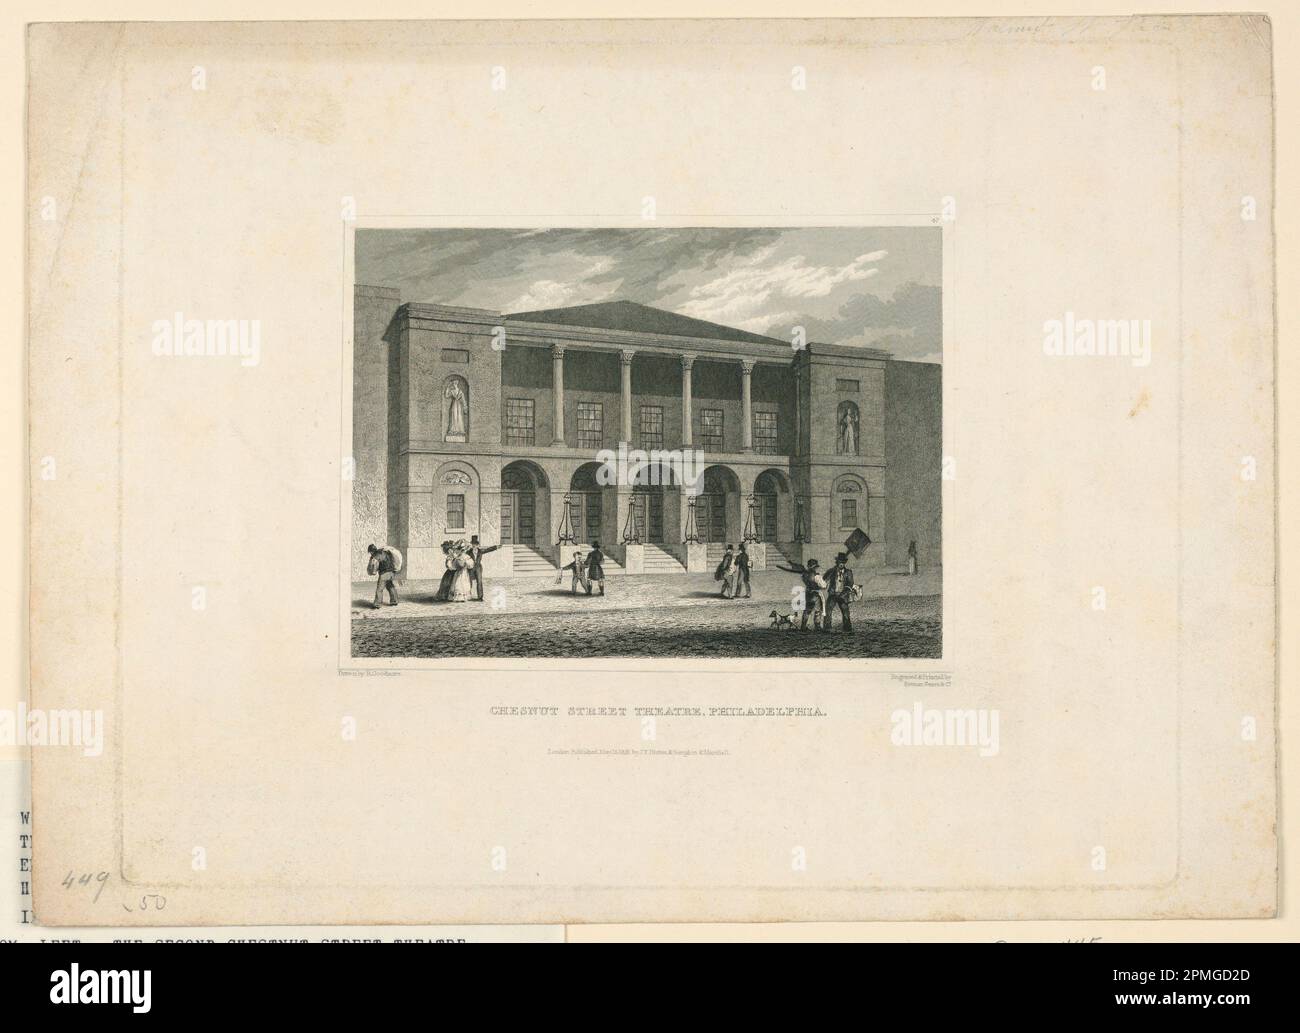 Print, Second Chestnut Street Theater, Philadelphia; Designed by R. Goodacre; engraving on paper; Platemark: 20.5 × 25.8 cm (8 1/16 × 10 3/16 in.) H x W: 22.2 × 30.5 cm (8 3/4 in. × 12 in.); Bequest of Erskine Hewitt; 1938-57-1434 Stock Photo